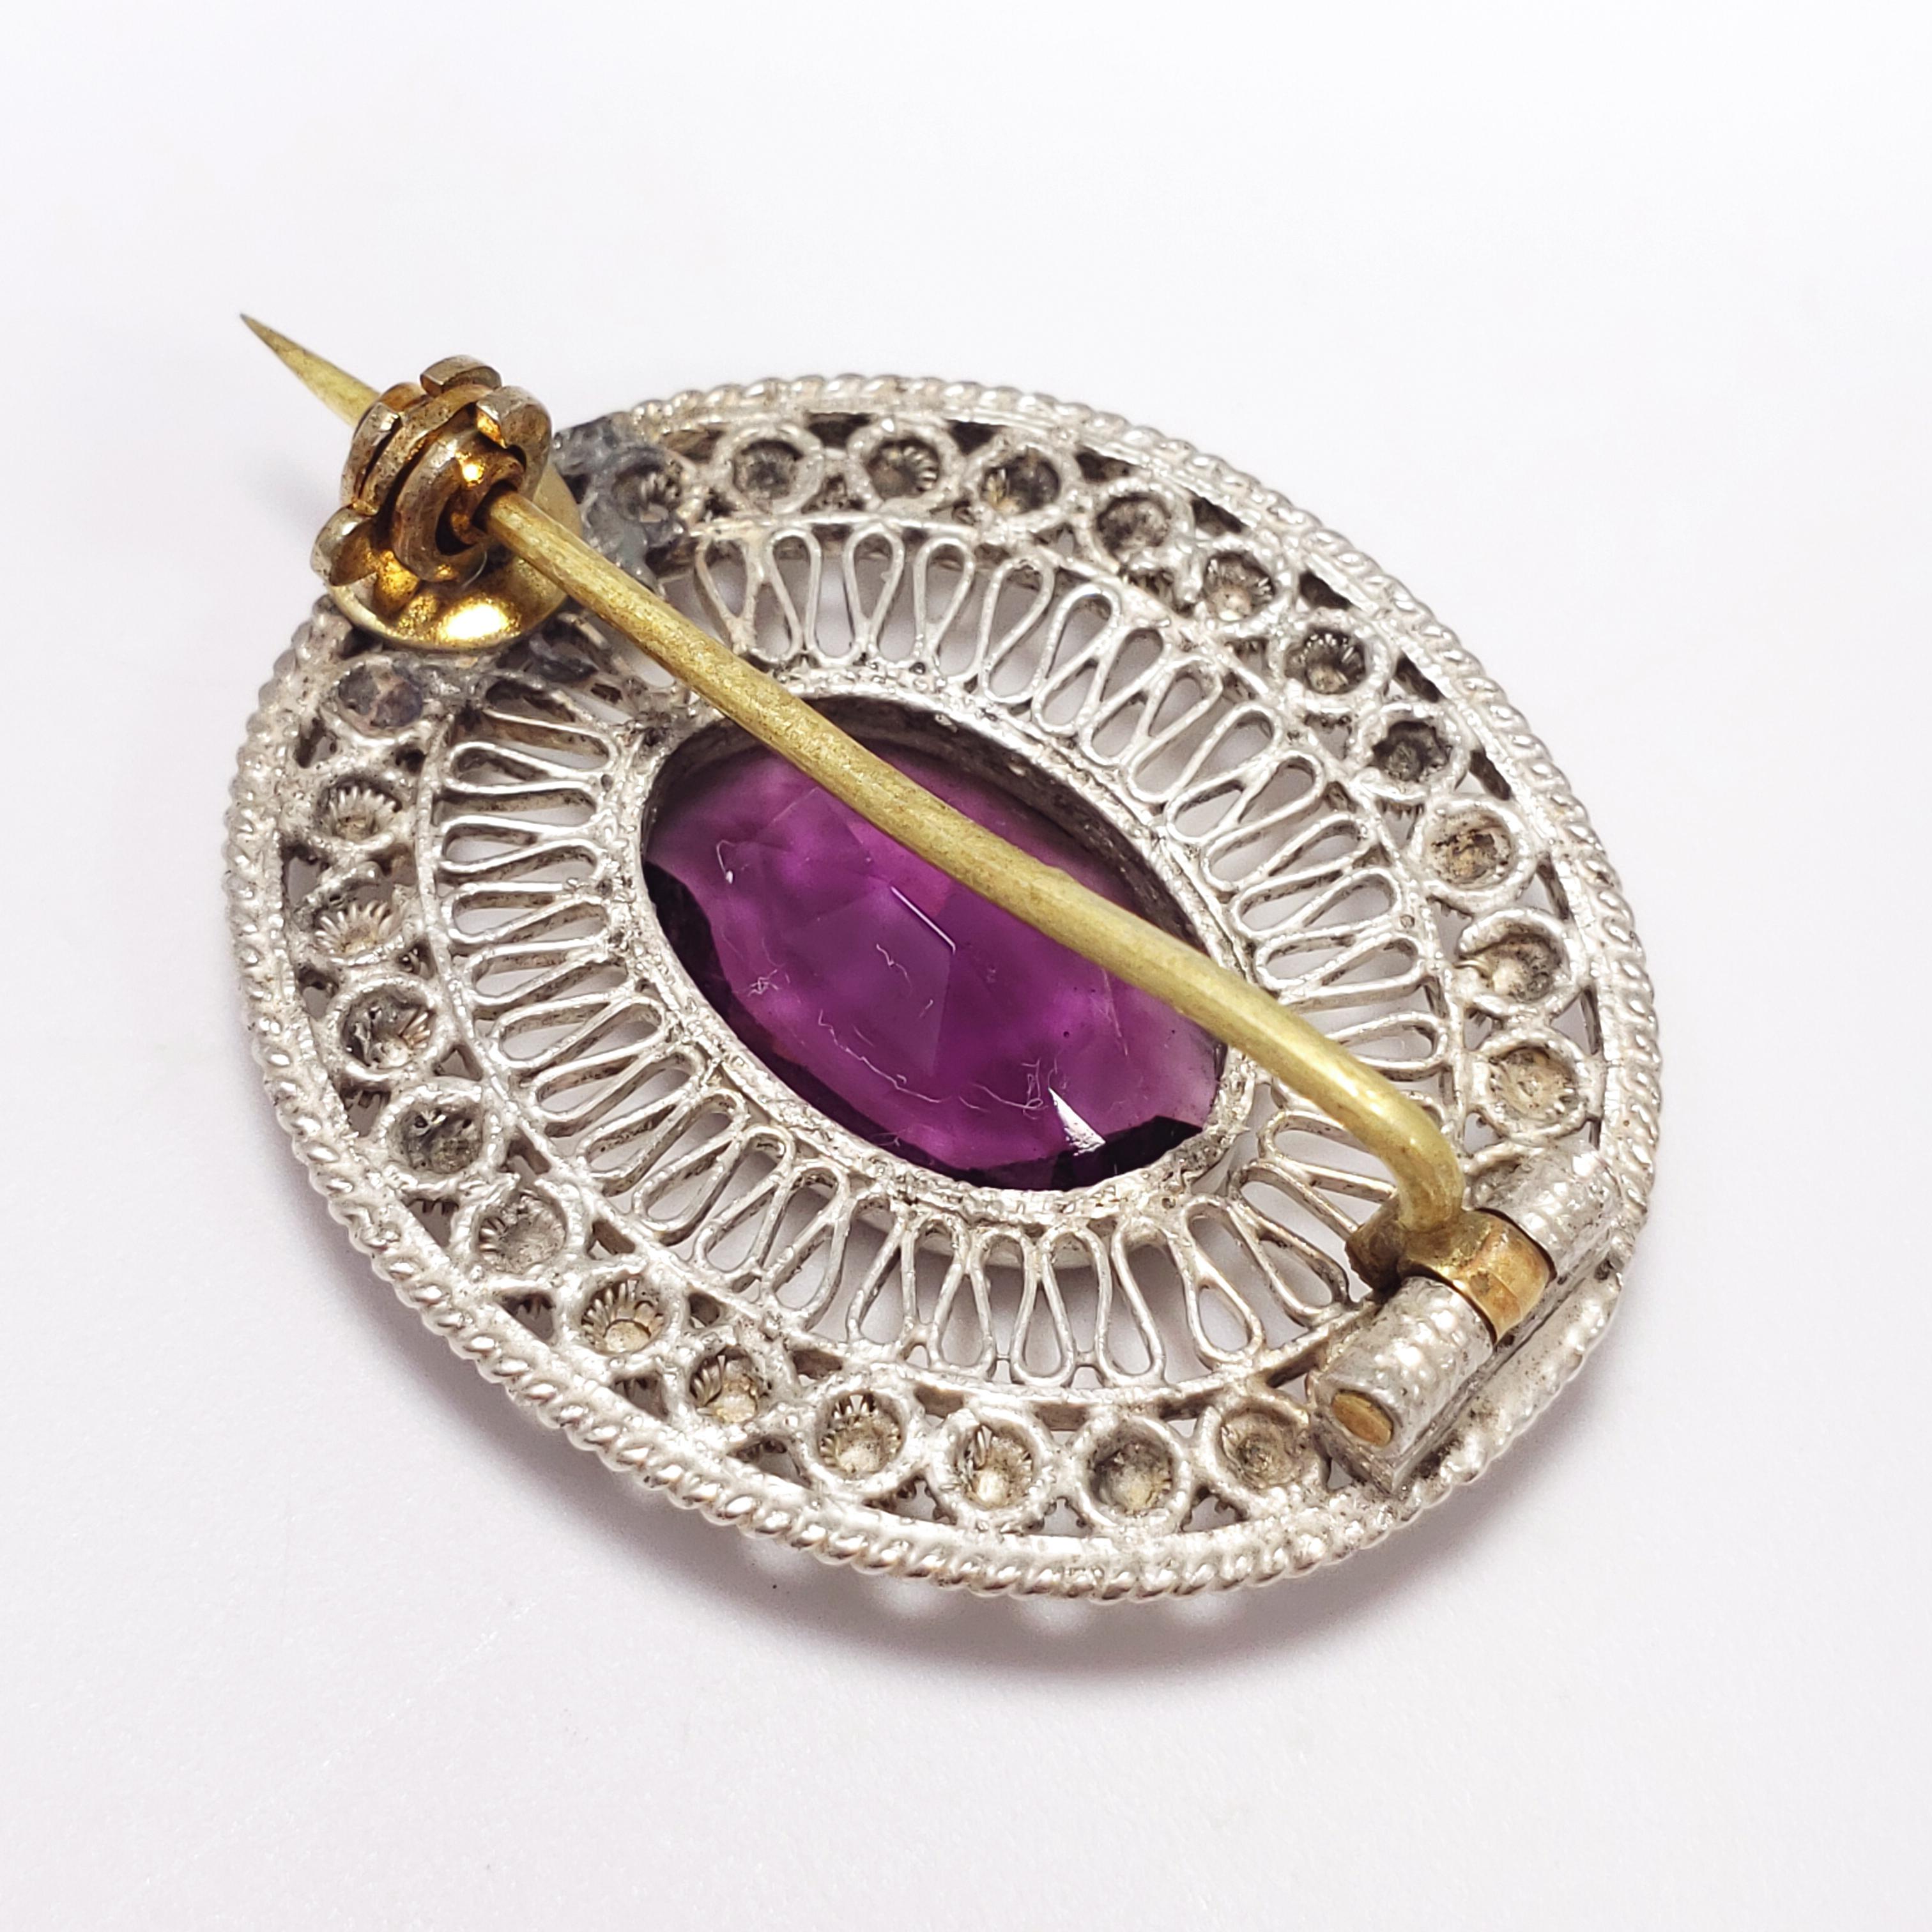 Oval Cut Victorian Amethyst Brooch Pin Sterling Silver Filigree Setting For Sale